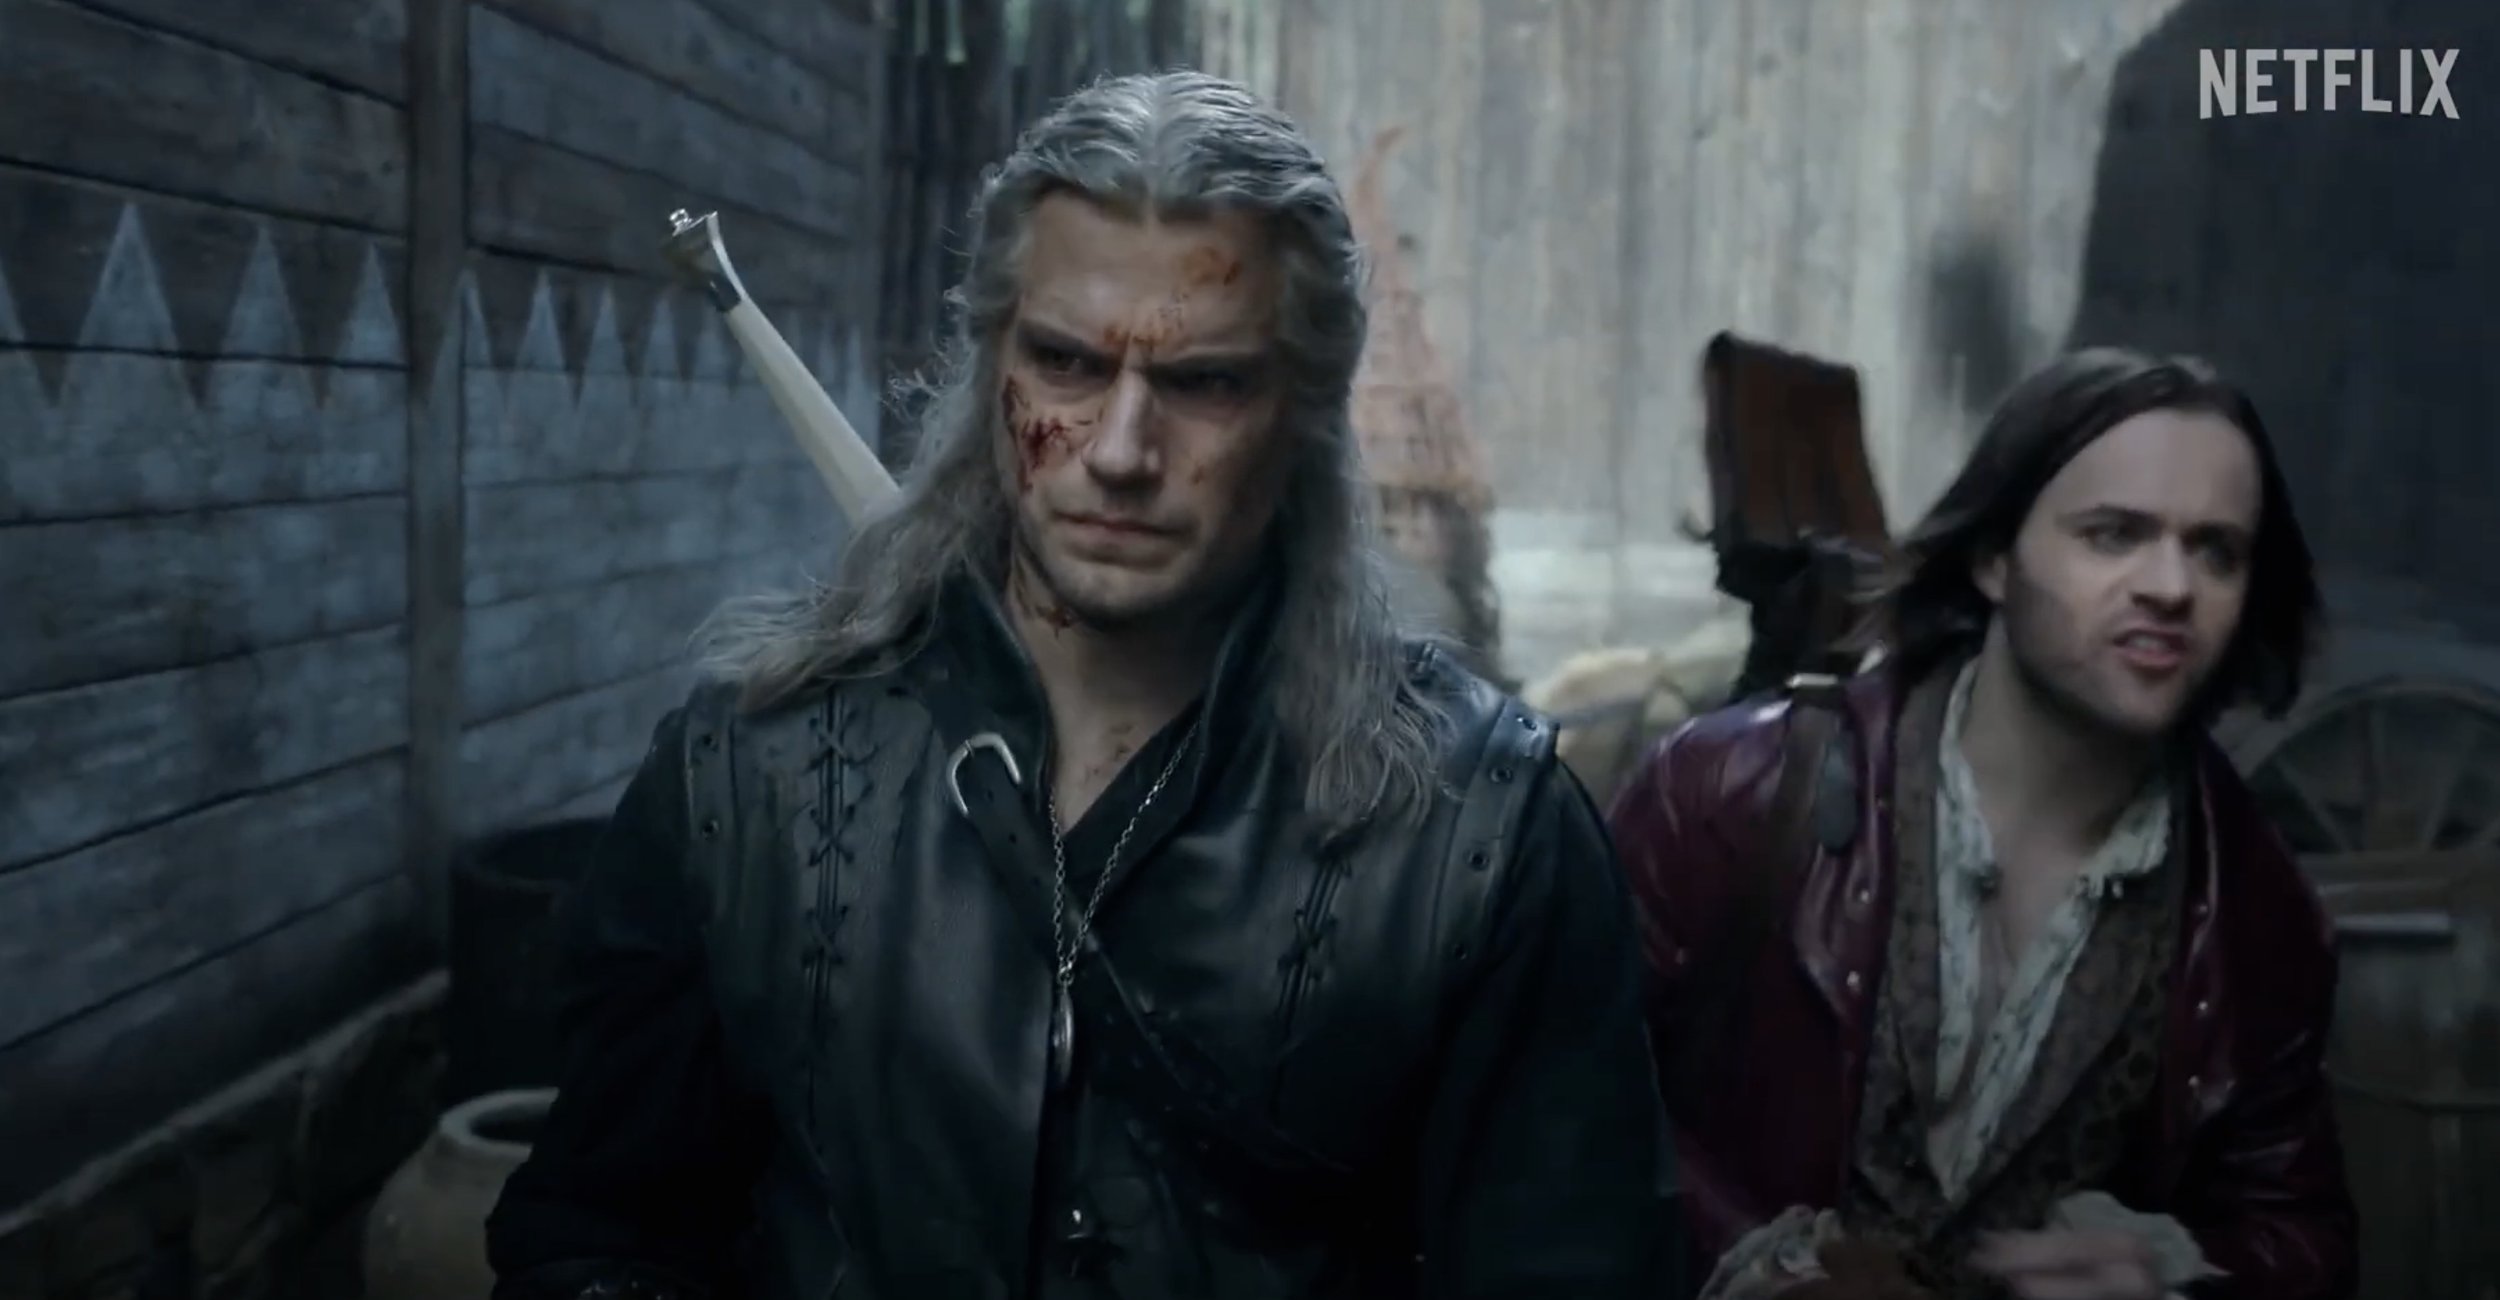 The Witcher' Season 3: Release Date, Trailer, And More Info